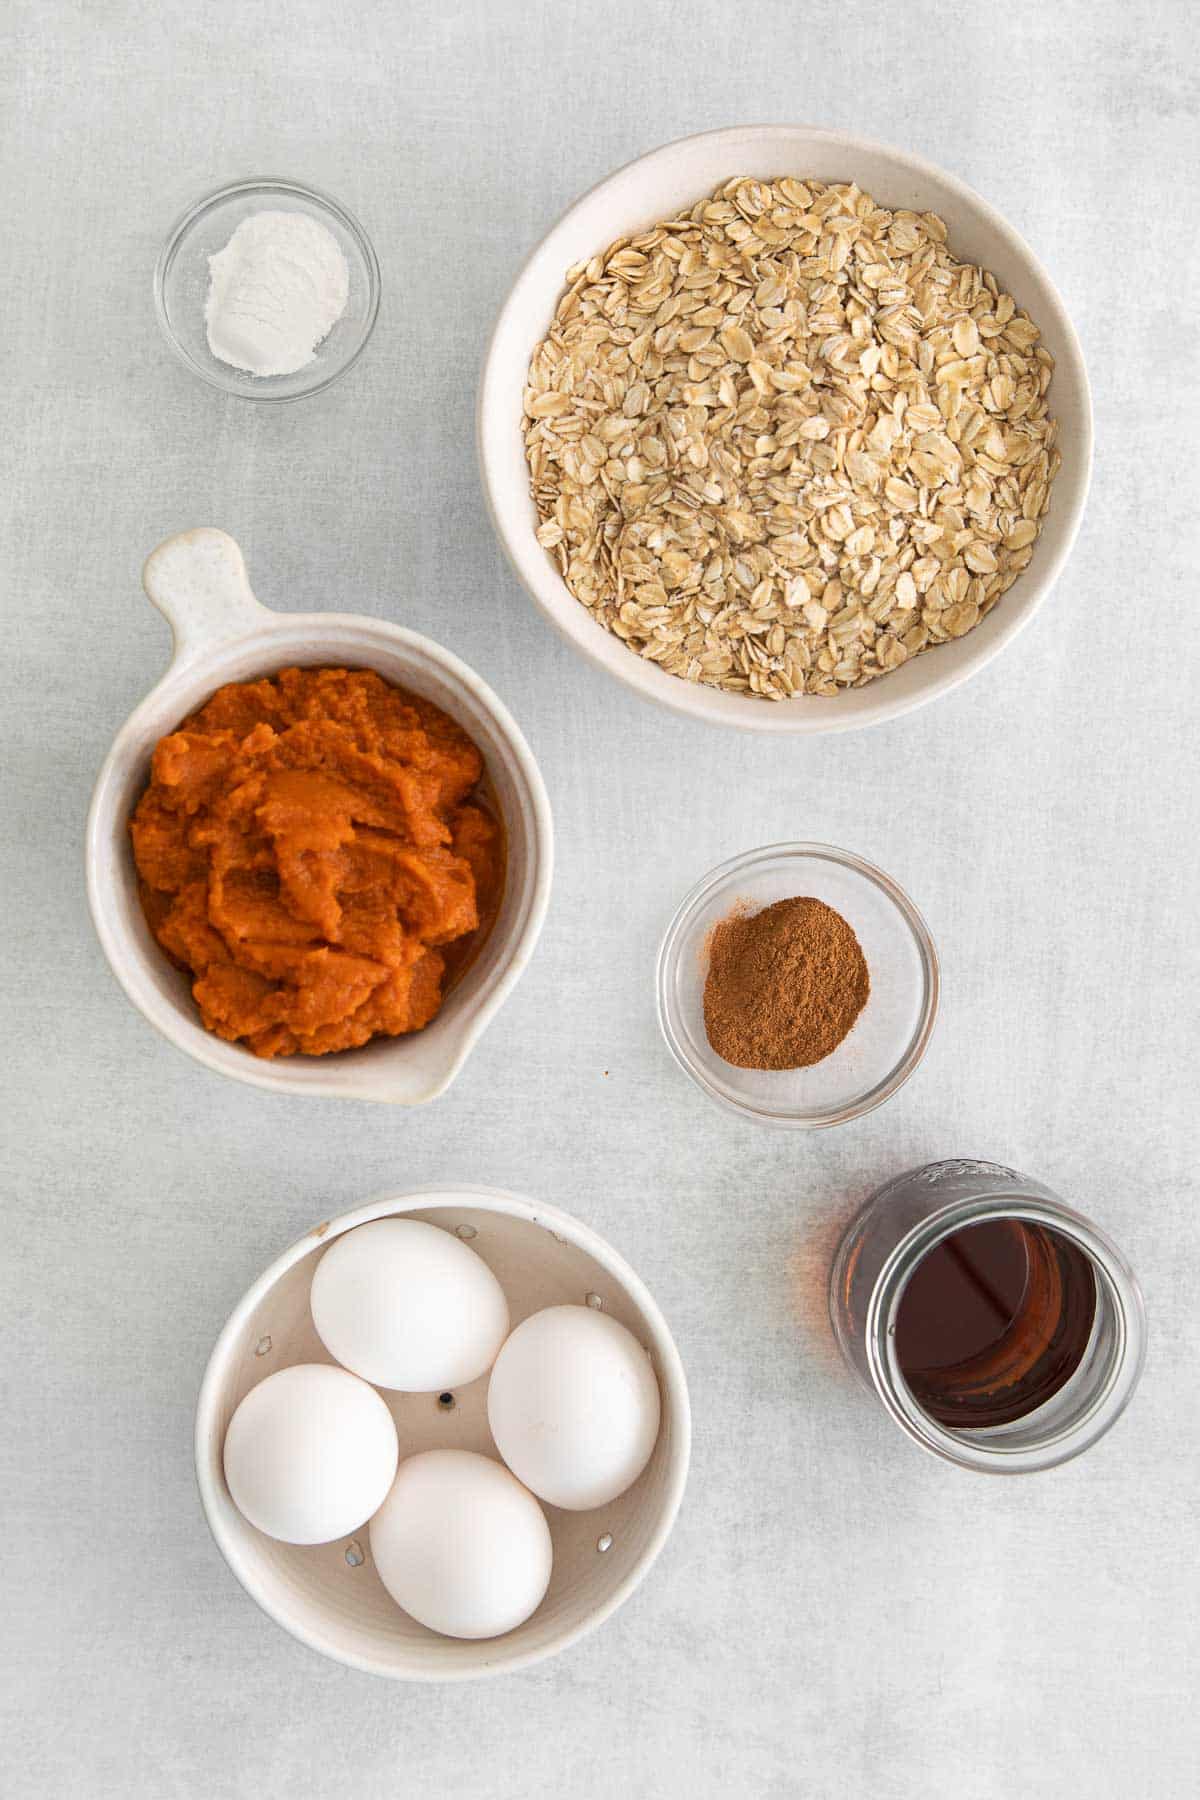 several white bowls with ingredients for pumpkin baked oatmeal - old fashioned oats, four eggs, pumpkin puree, cinnamon, and maple syrup.